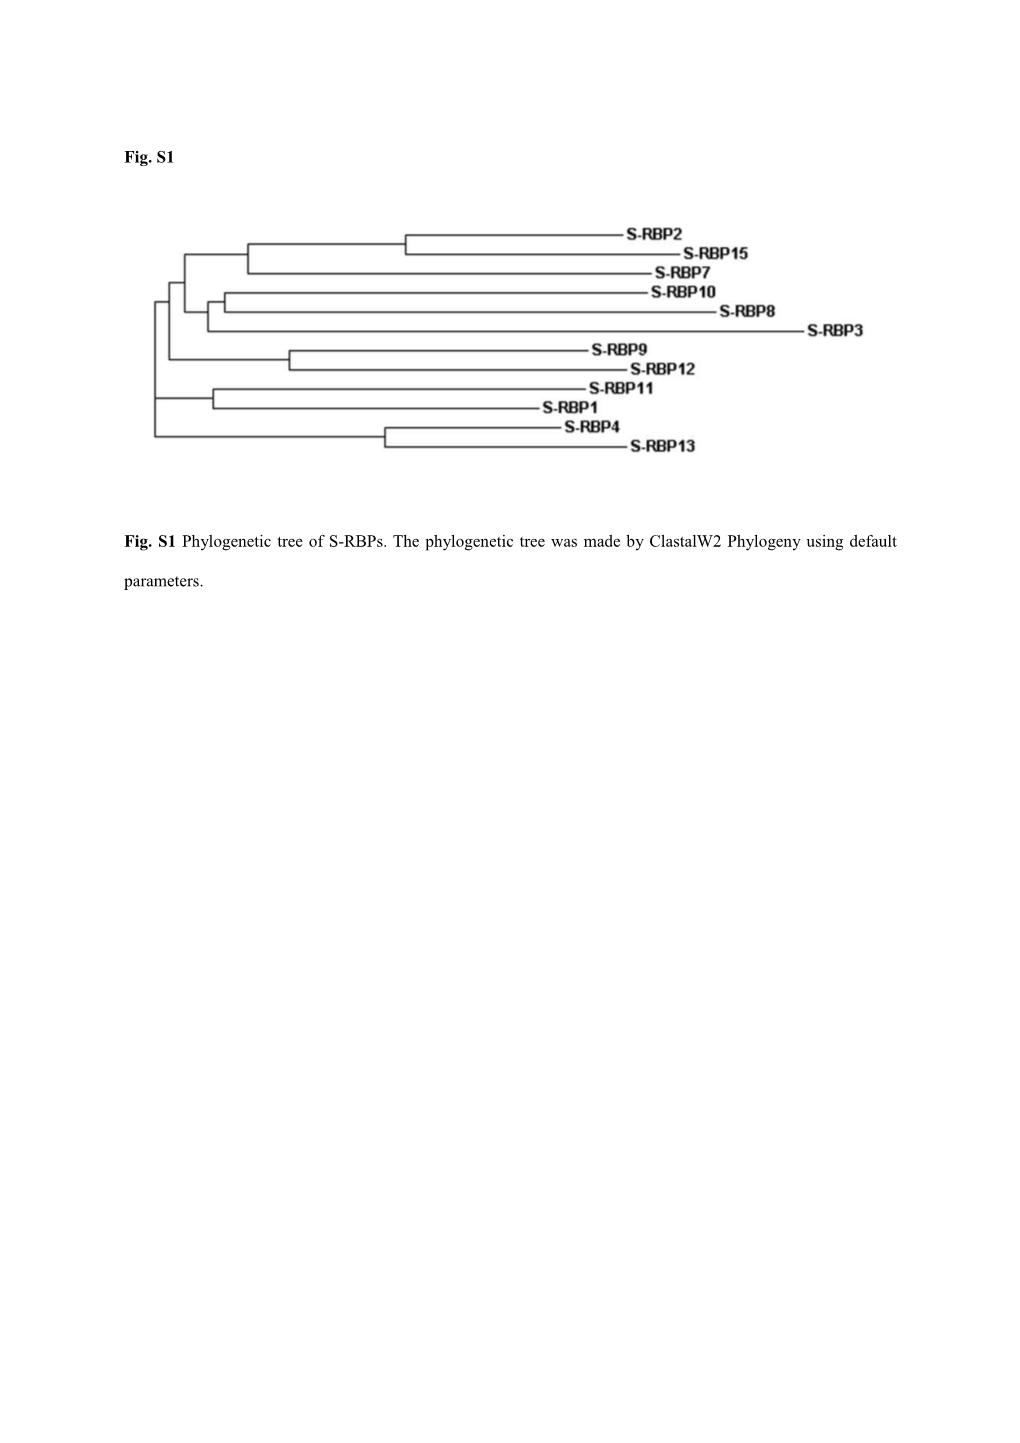 Fig. S1 Phylogenetic Tree of S-Rbps. the Phylogenetic Tree Was Made by Clastalw2 Phylogeny